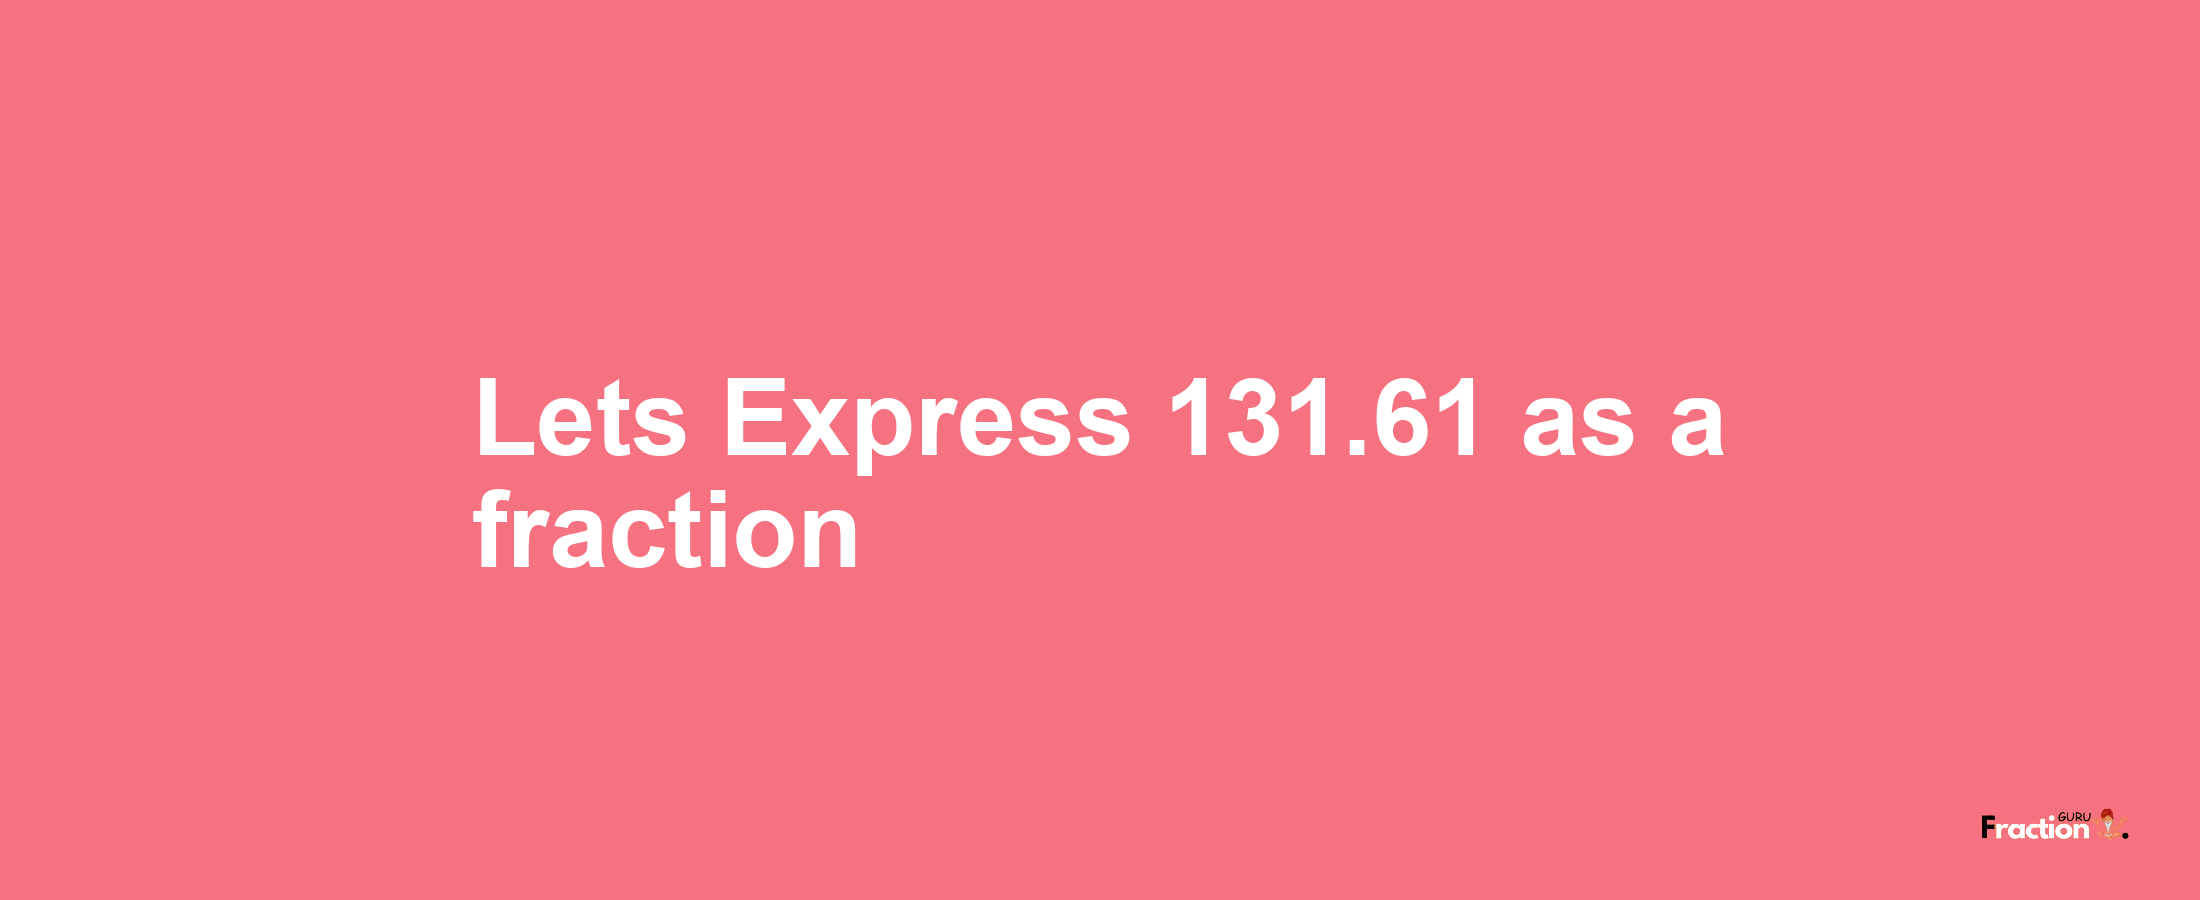 Lets Express 131.61 as afraction